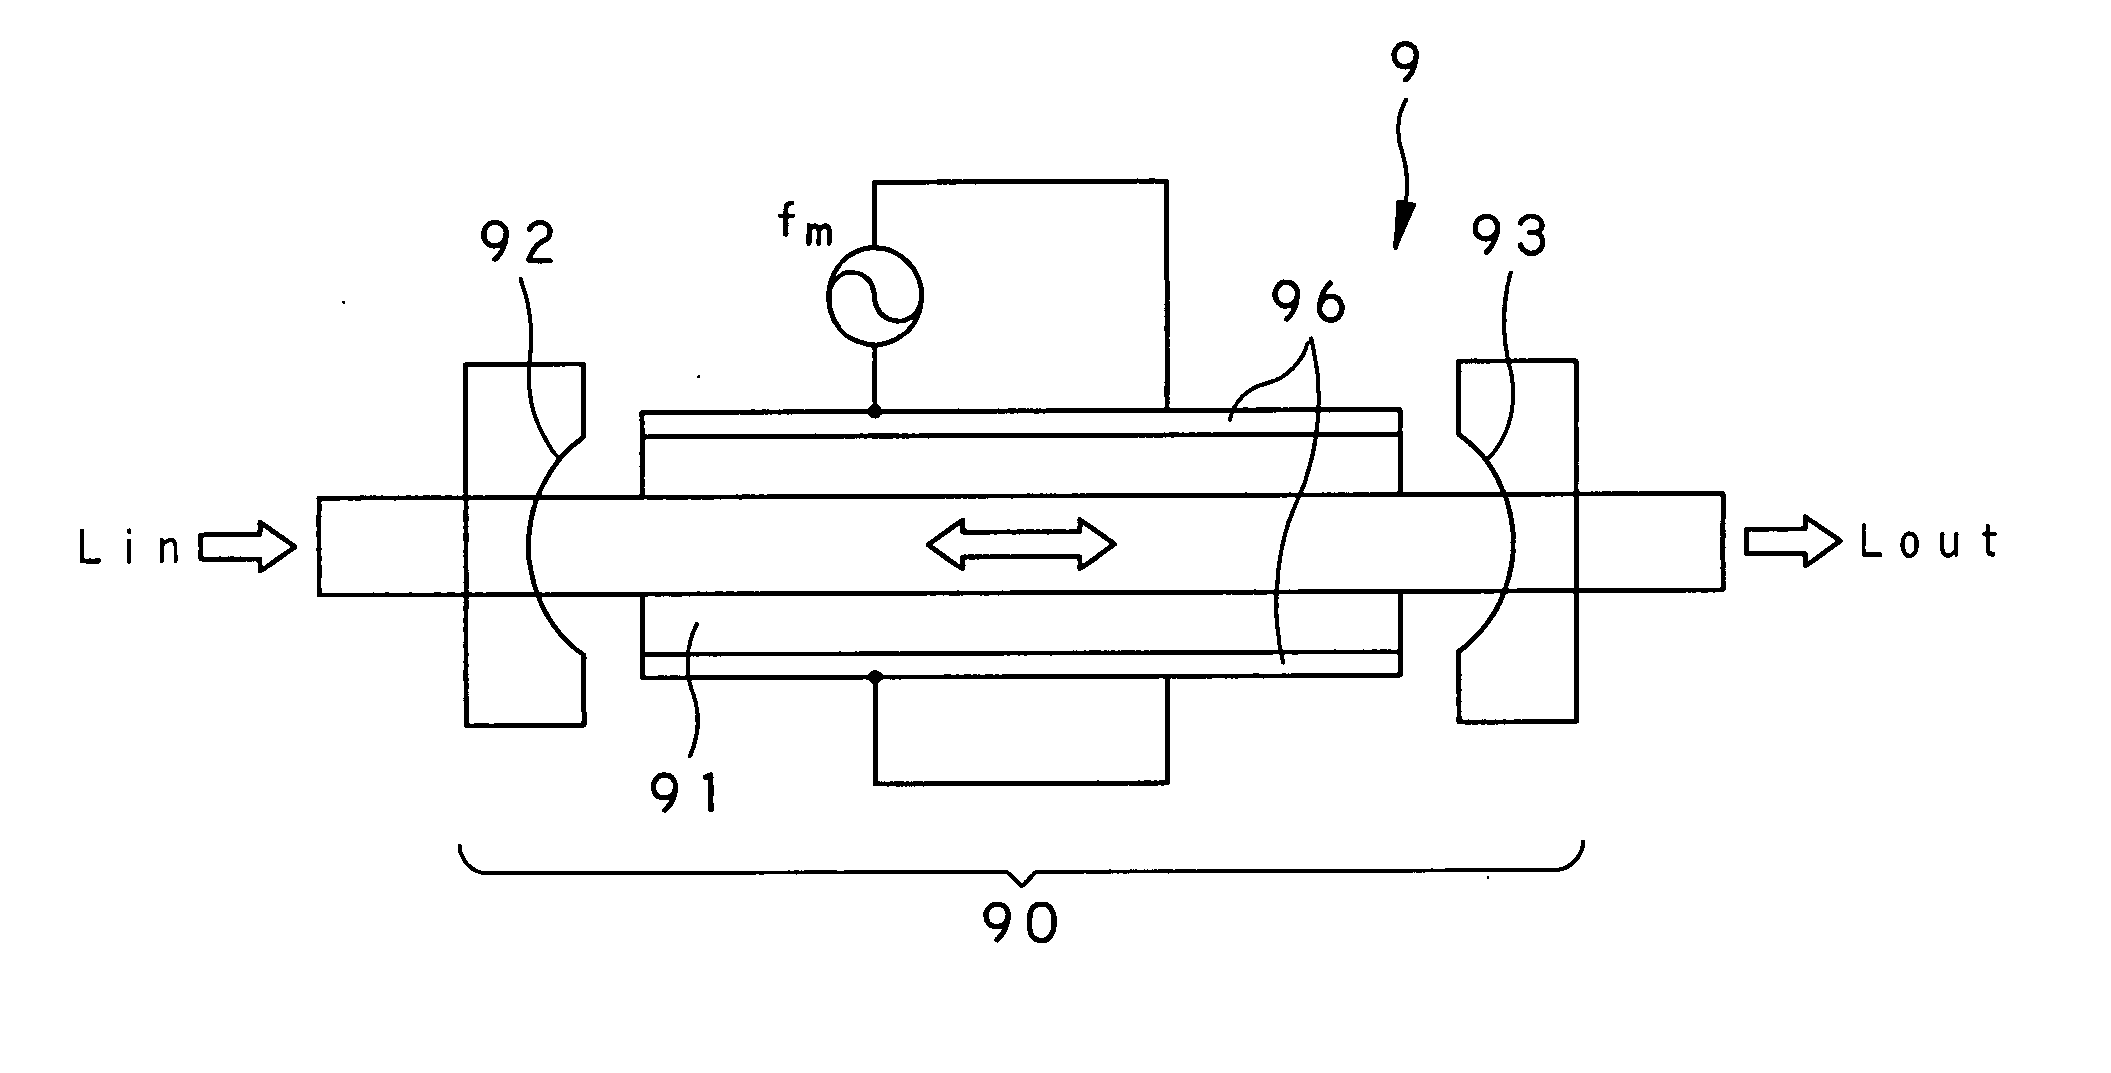 Optical frequency comb generator